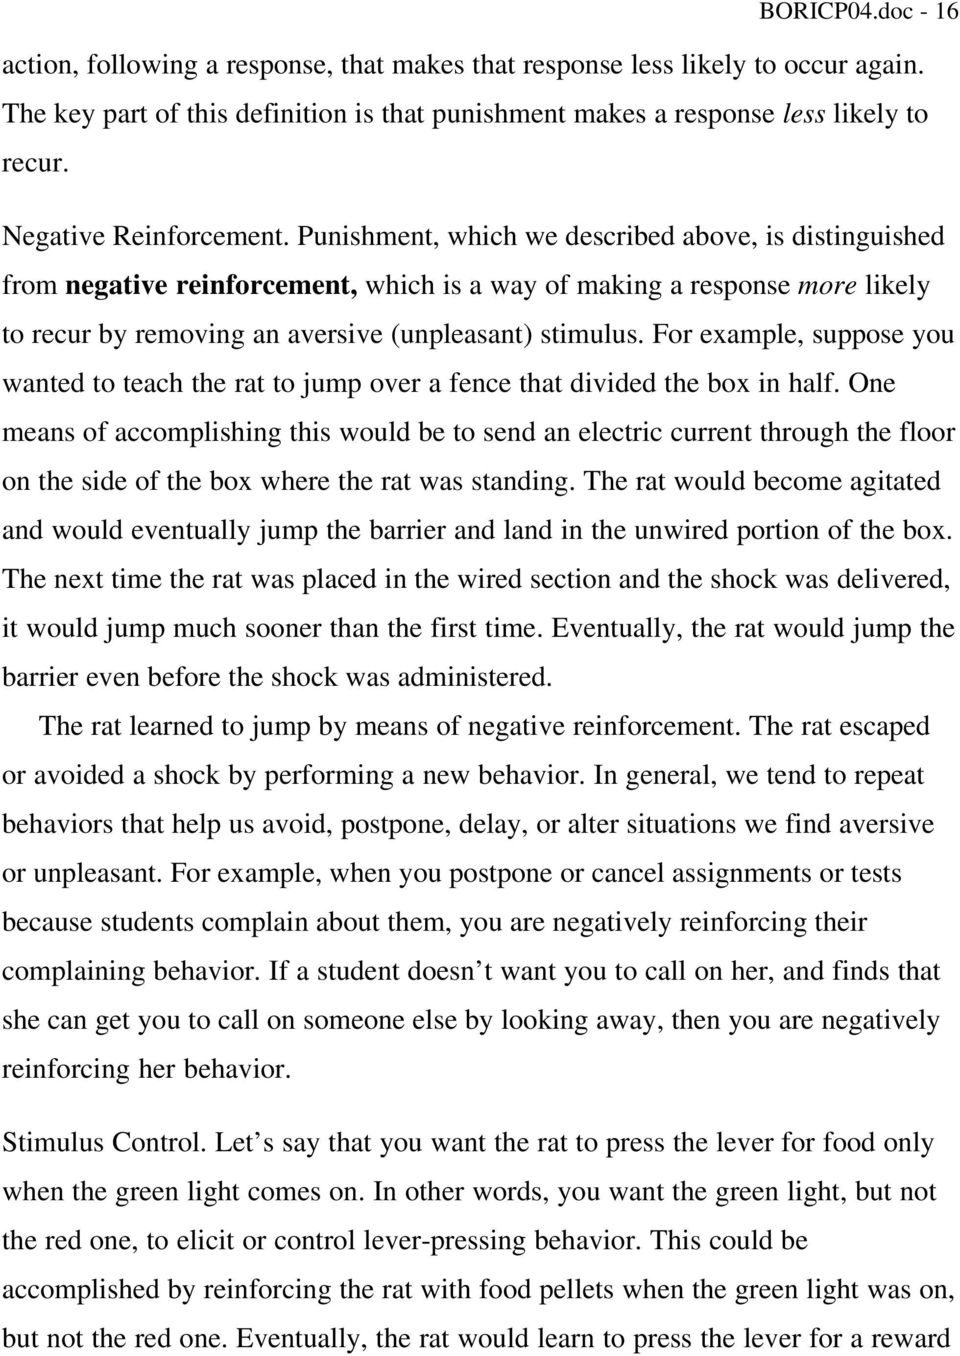 Punishment, which we described above, is distinguished from negative reinforcement, which is a way of making a response more likely to recur by removing an aversive (unpleasant) stimulus.